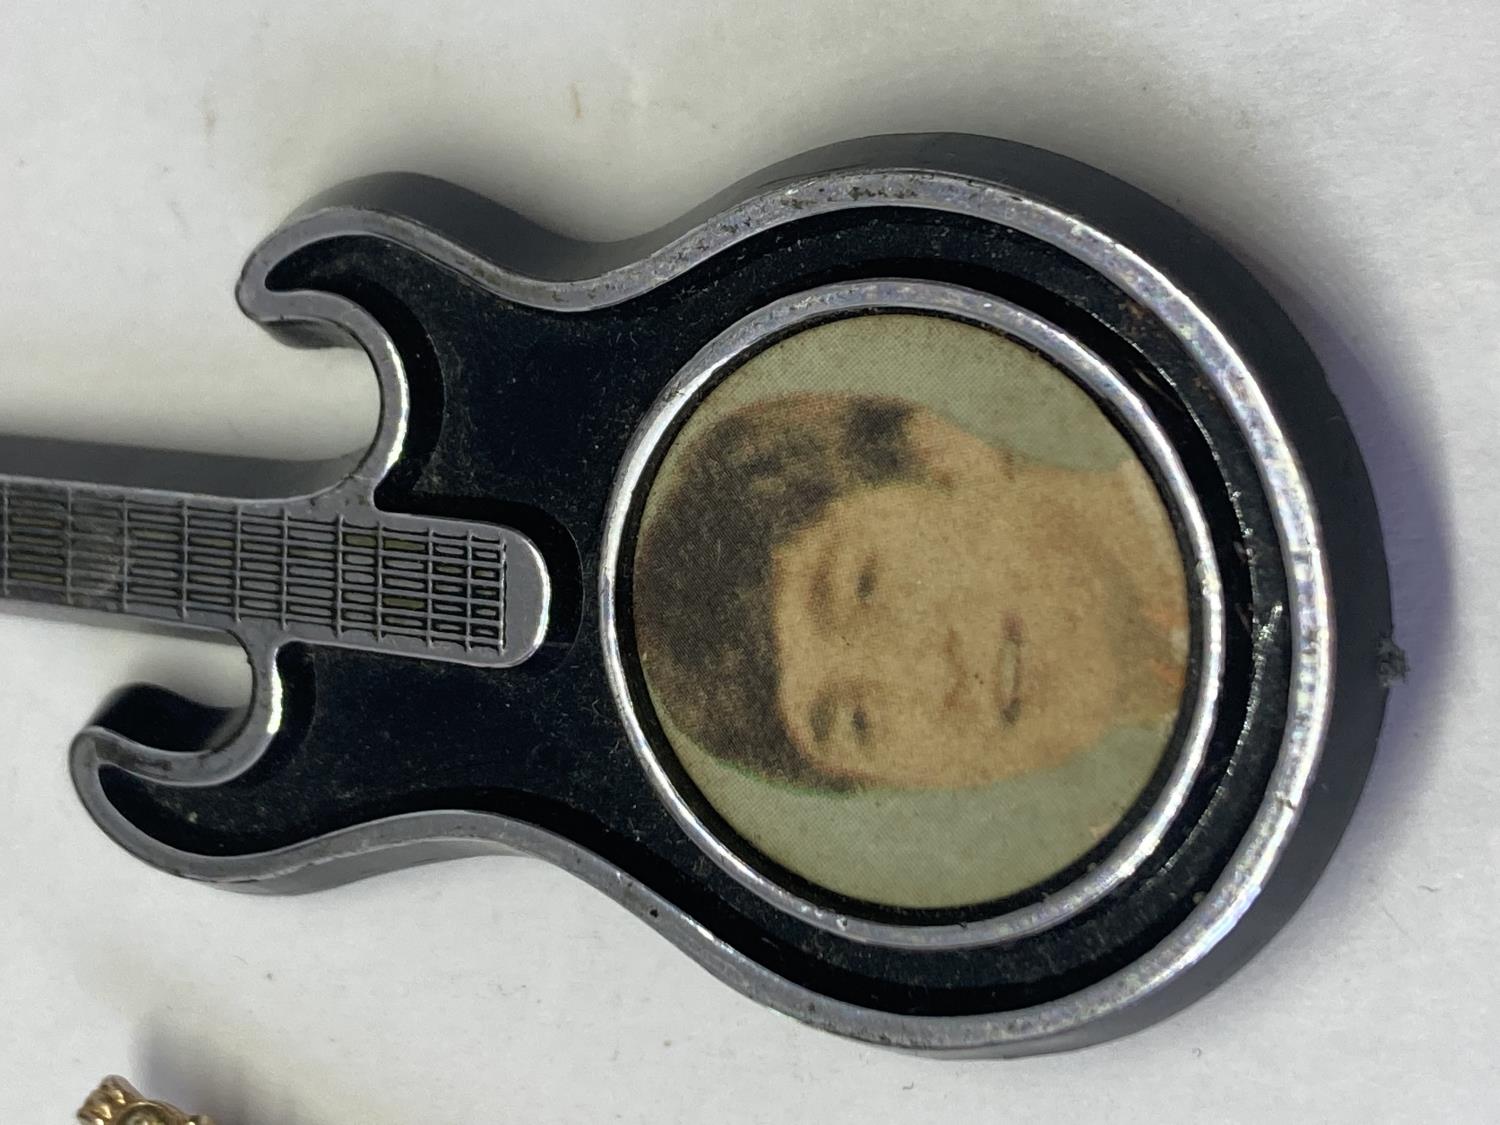 A RARE VINTAGE BEATLES GUITAR BROOCH AND A MOTHER OF PEARL EXAMPLE - Image 3 of 10